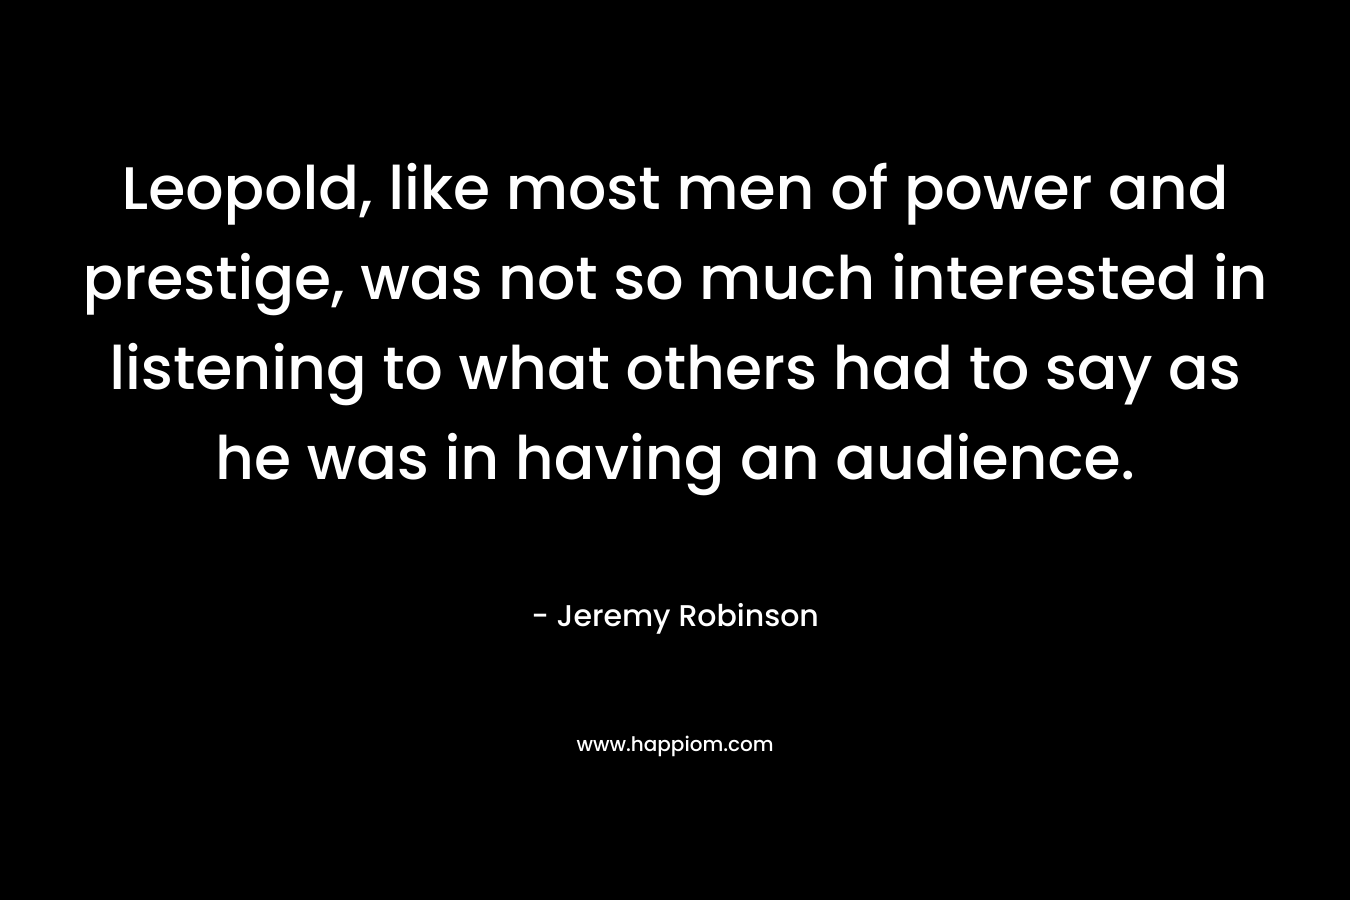 Leopold, like most men of power and prestige, was not so much interested in listening to what others had to say as he was in having an audience.